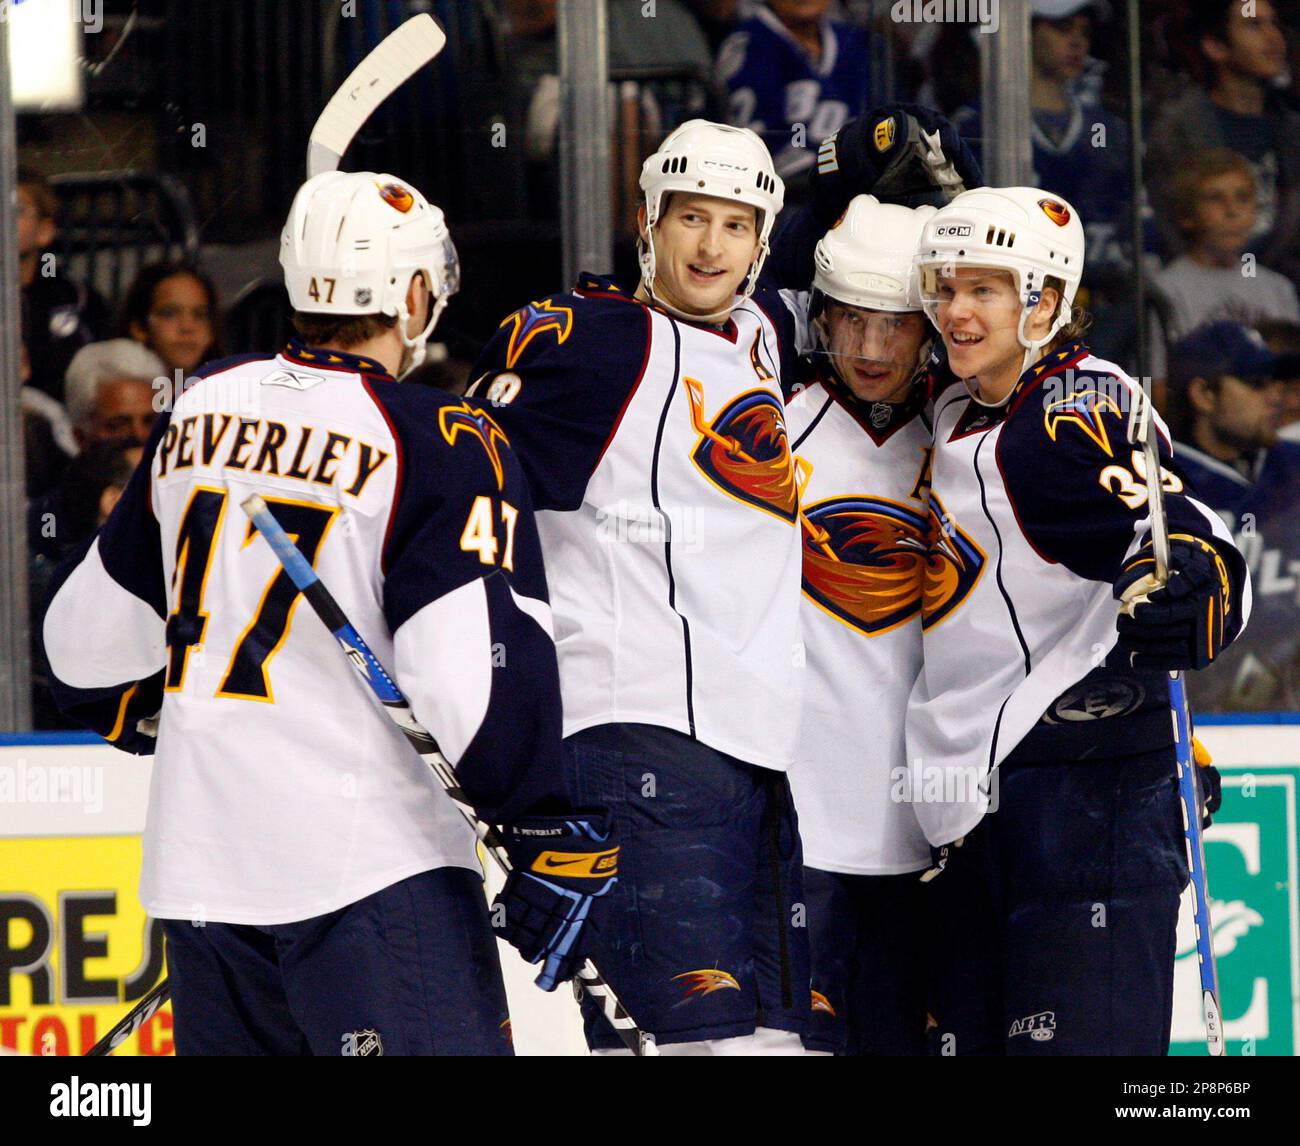 Atlanta Thrashers', from left, Colby Armstrong, Jason Williams and